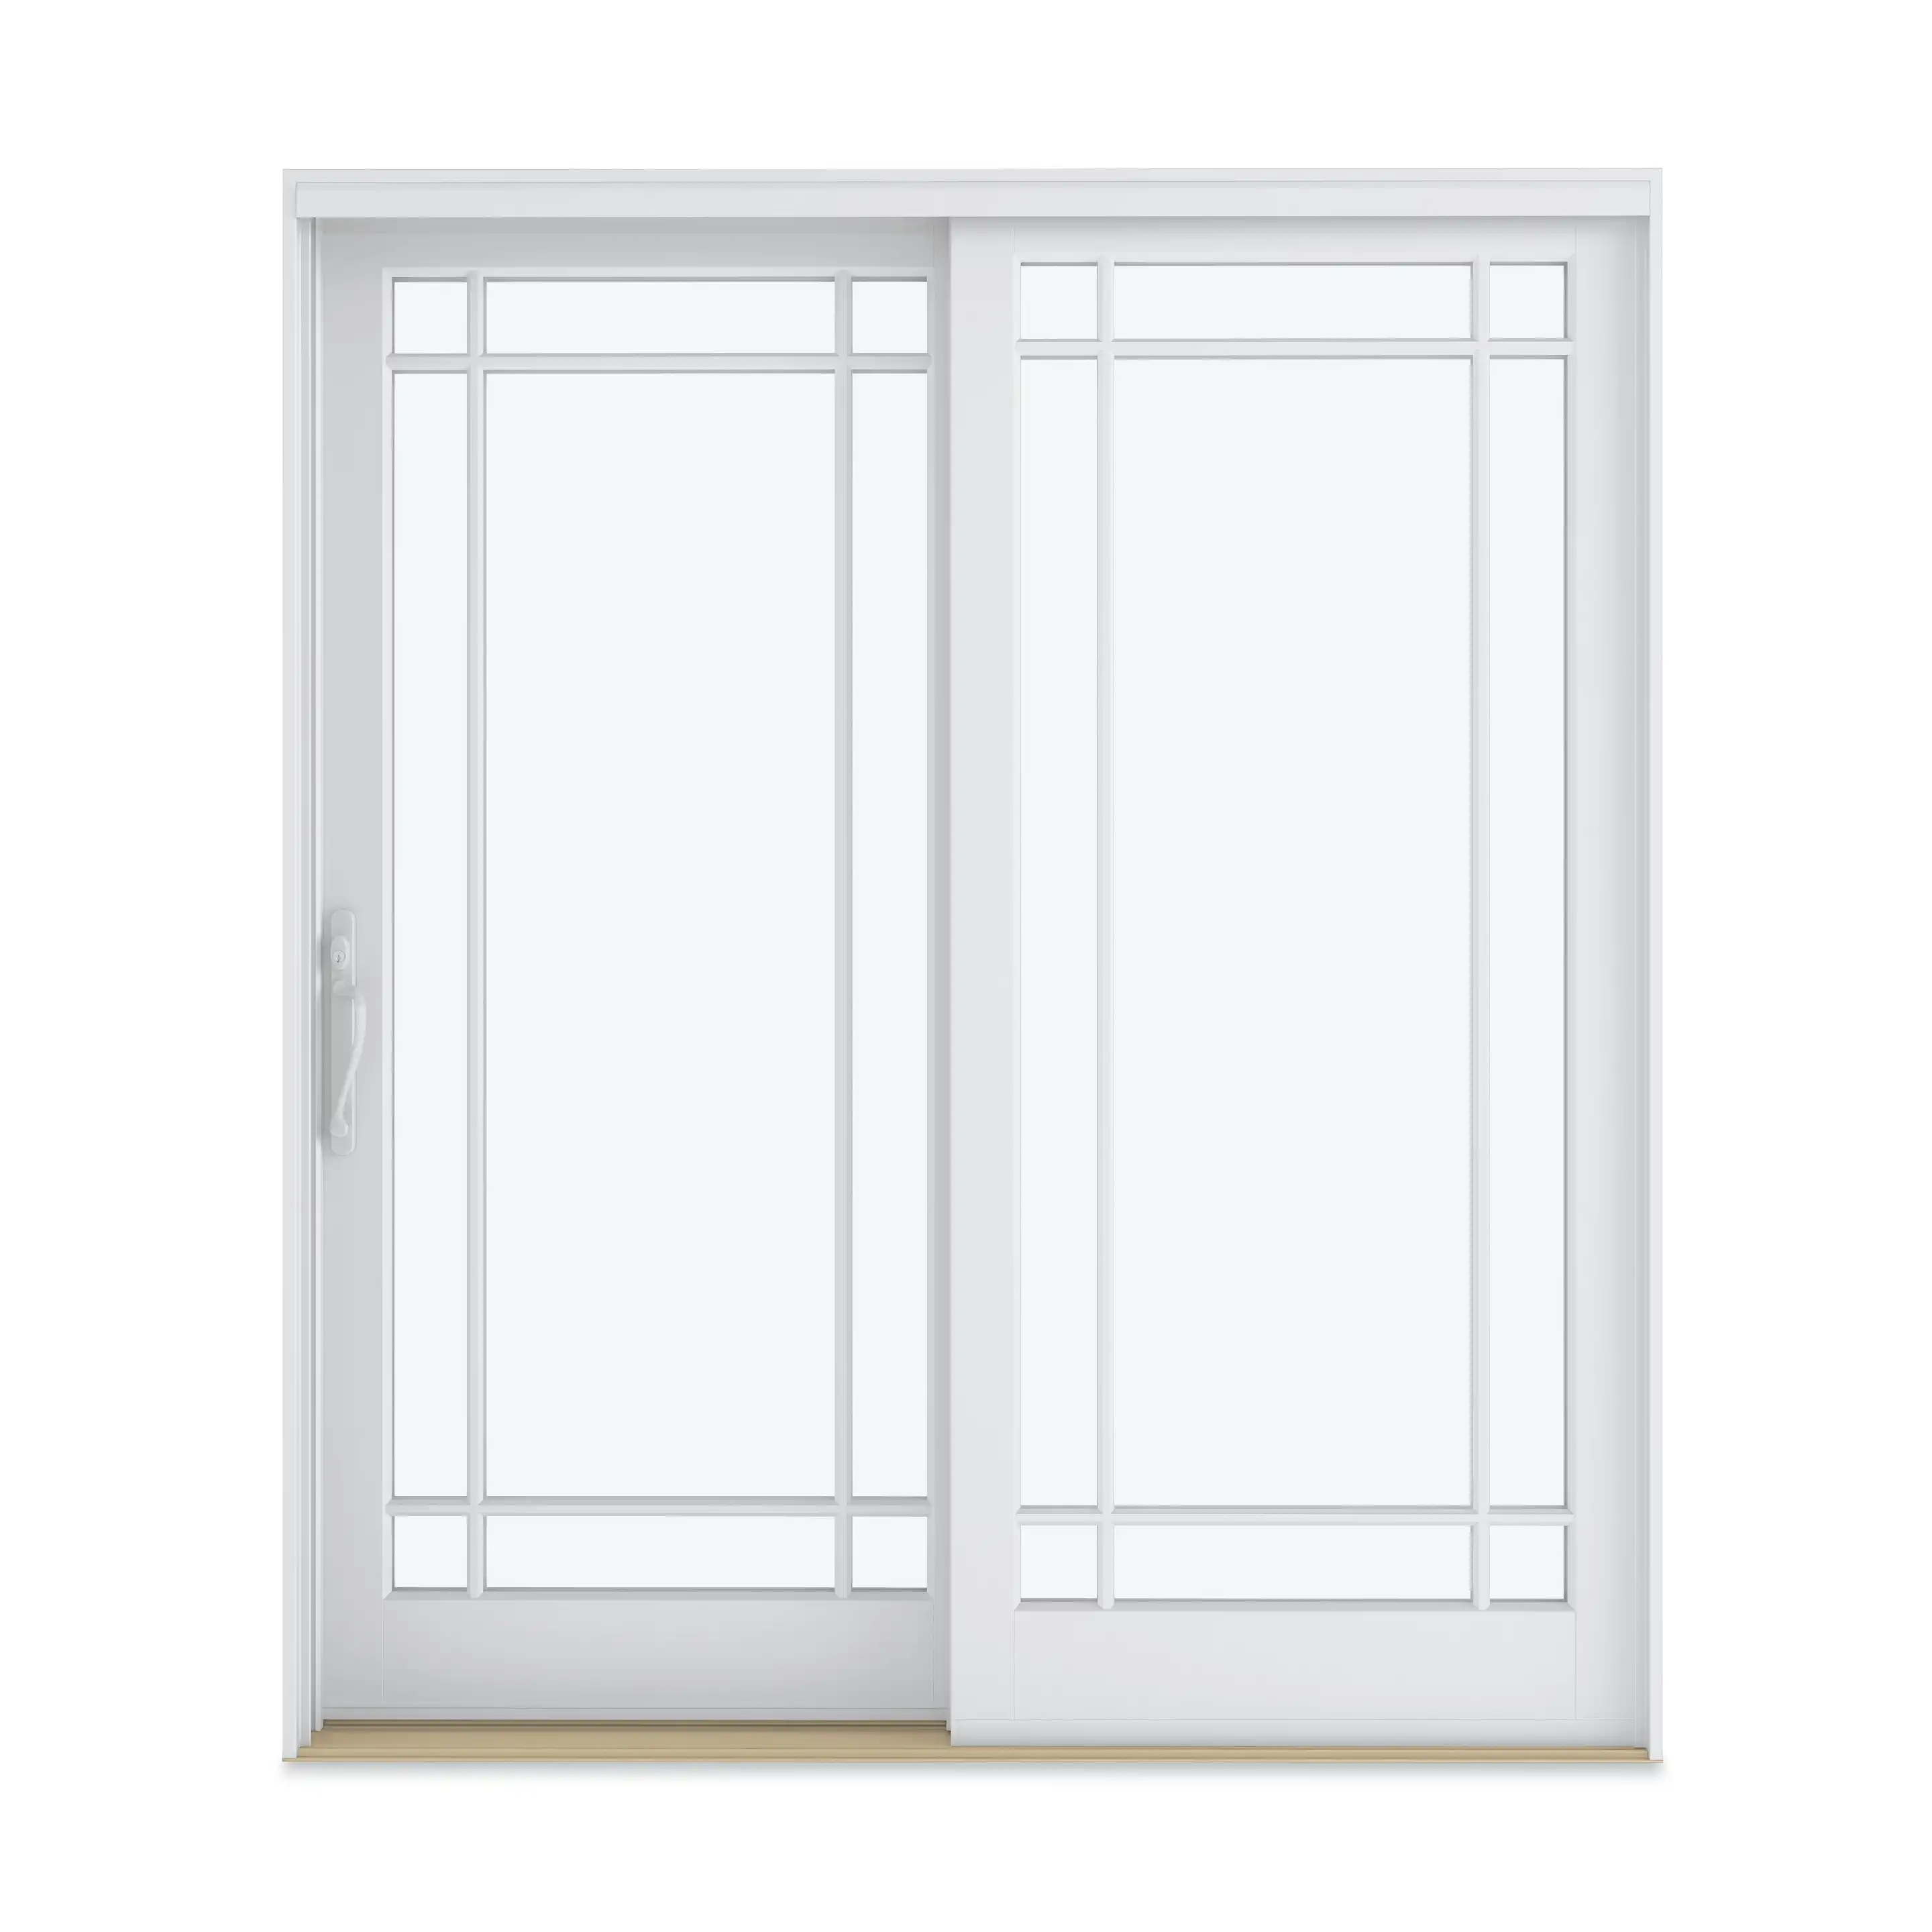 A white Marvin Replacement Sliding French door with Prairie style divided lites.